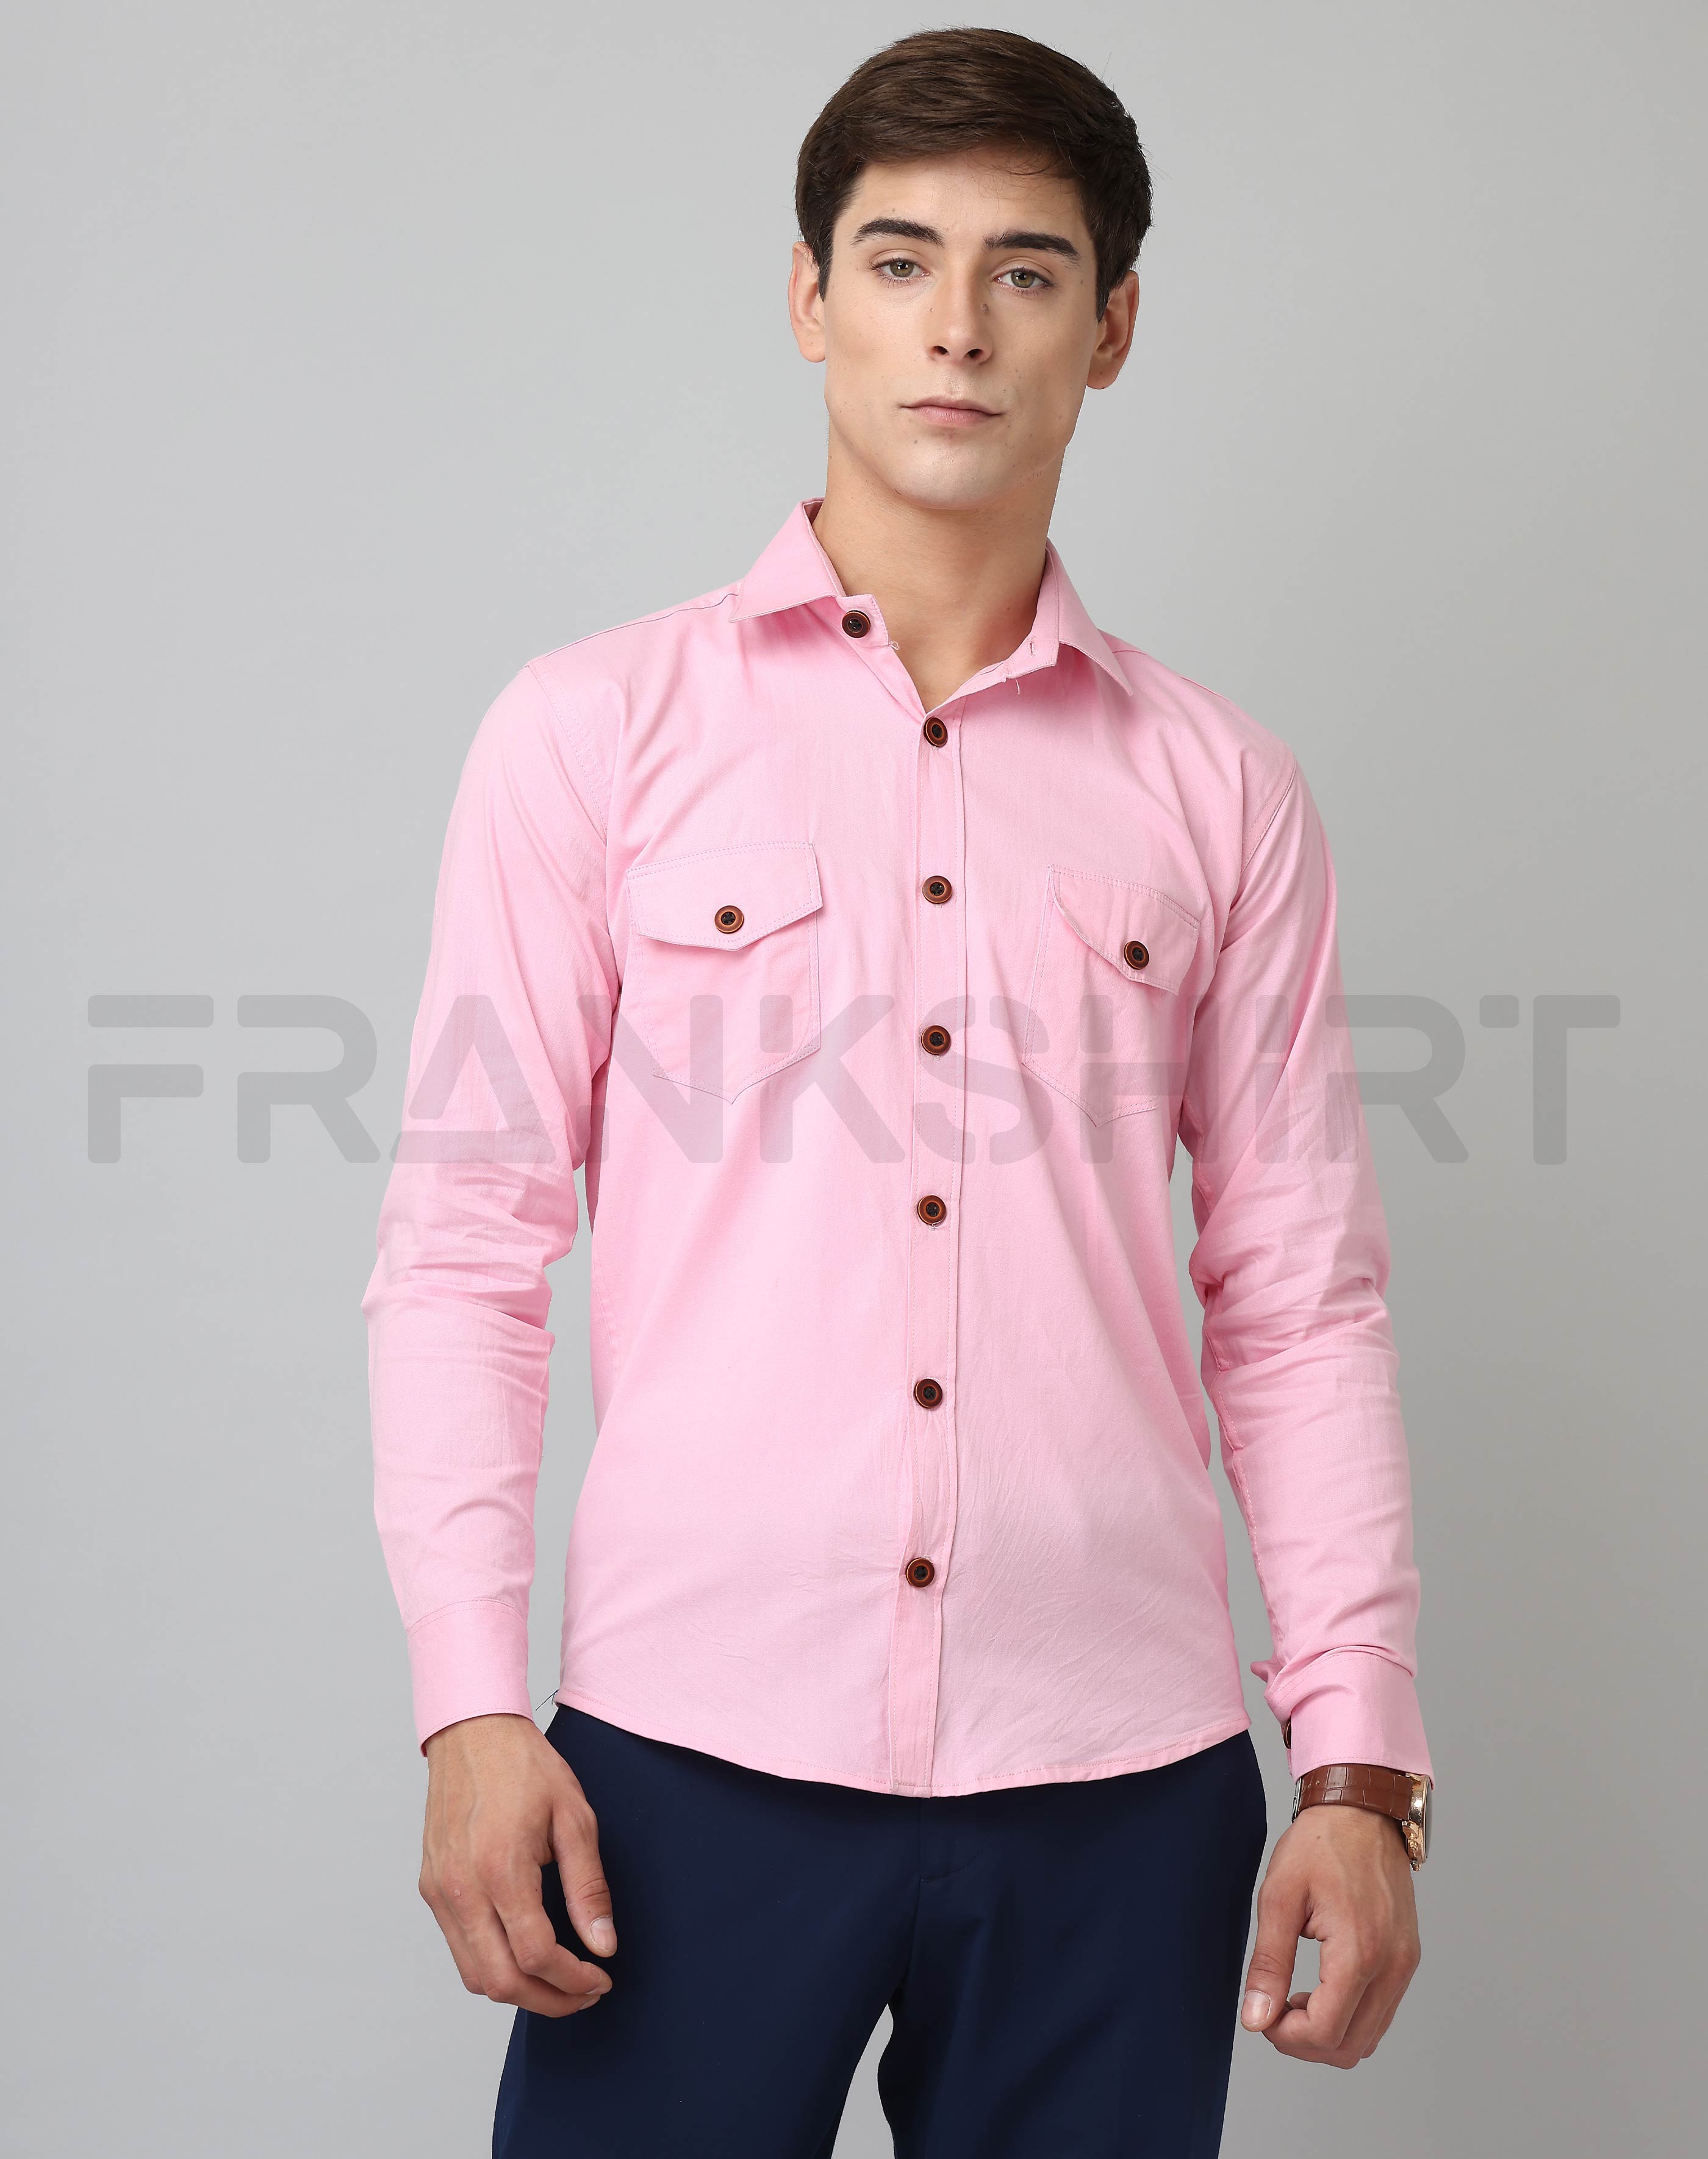 Frankshirt Double Pocket Pink Solid Tailored Fit Cotton Casual Shirt for Man